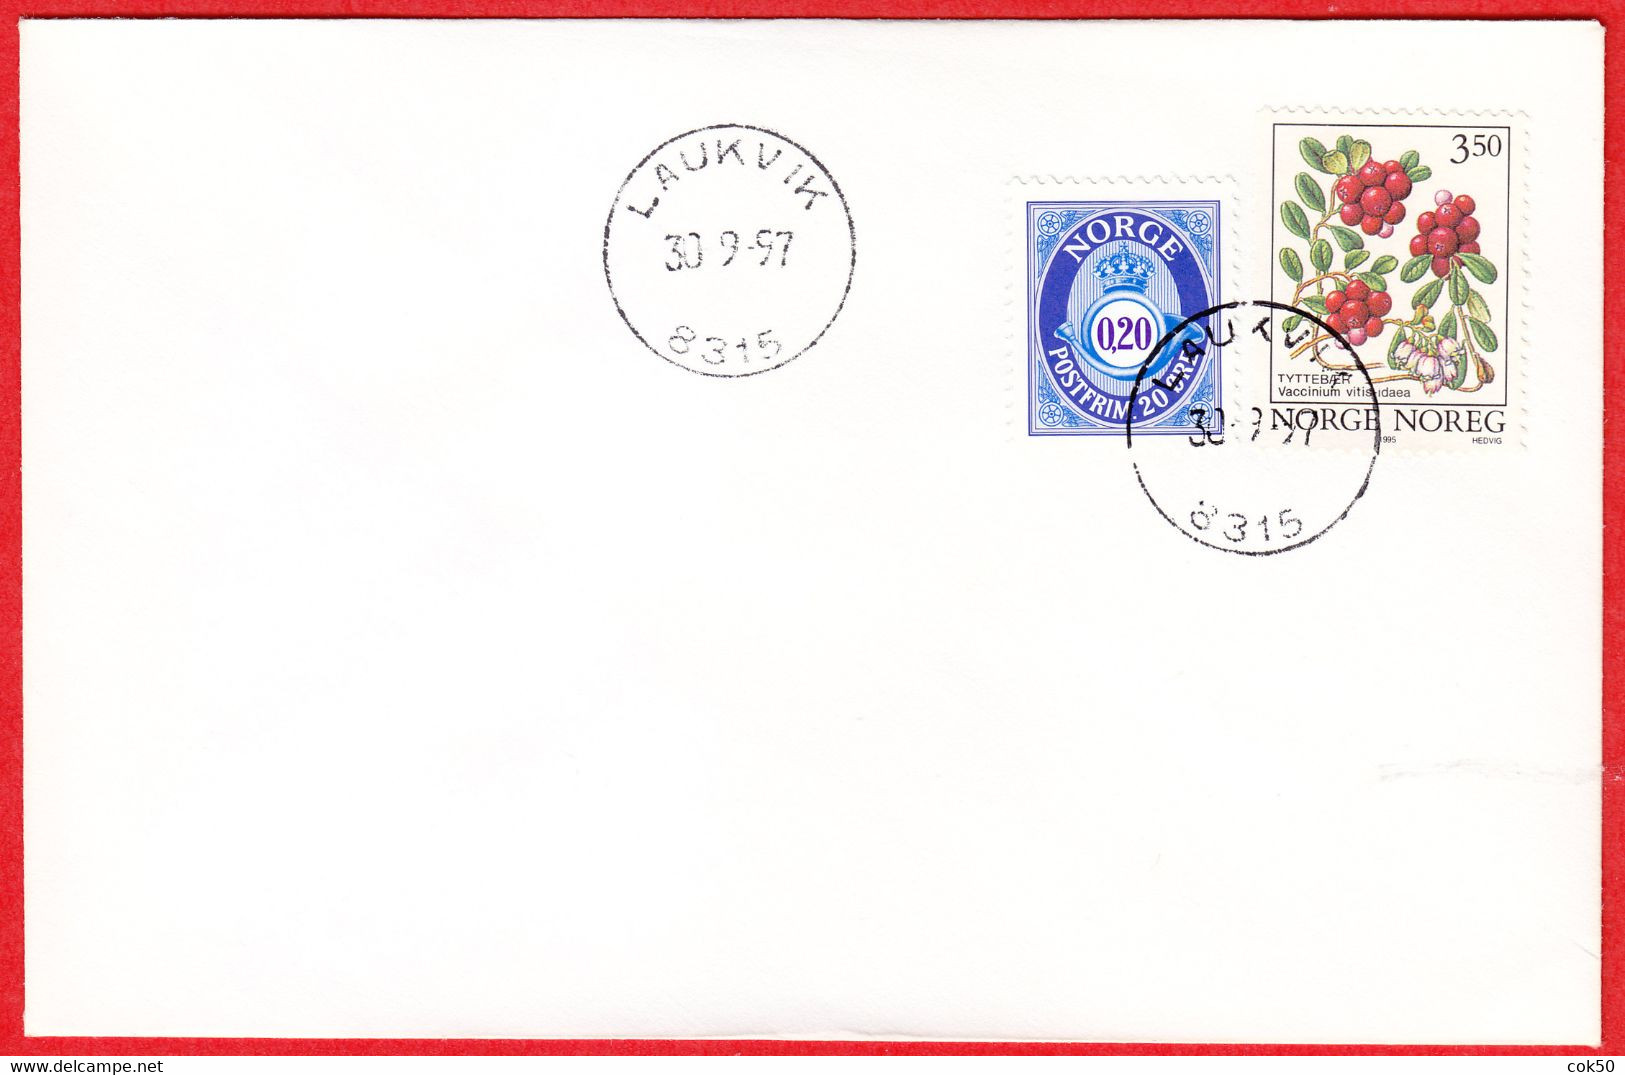 NORWAY -  8315 LAUKVIK - (Nordland County) - Last Day/postoffice Closed On 1997.09.30 - Local Post Stamps